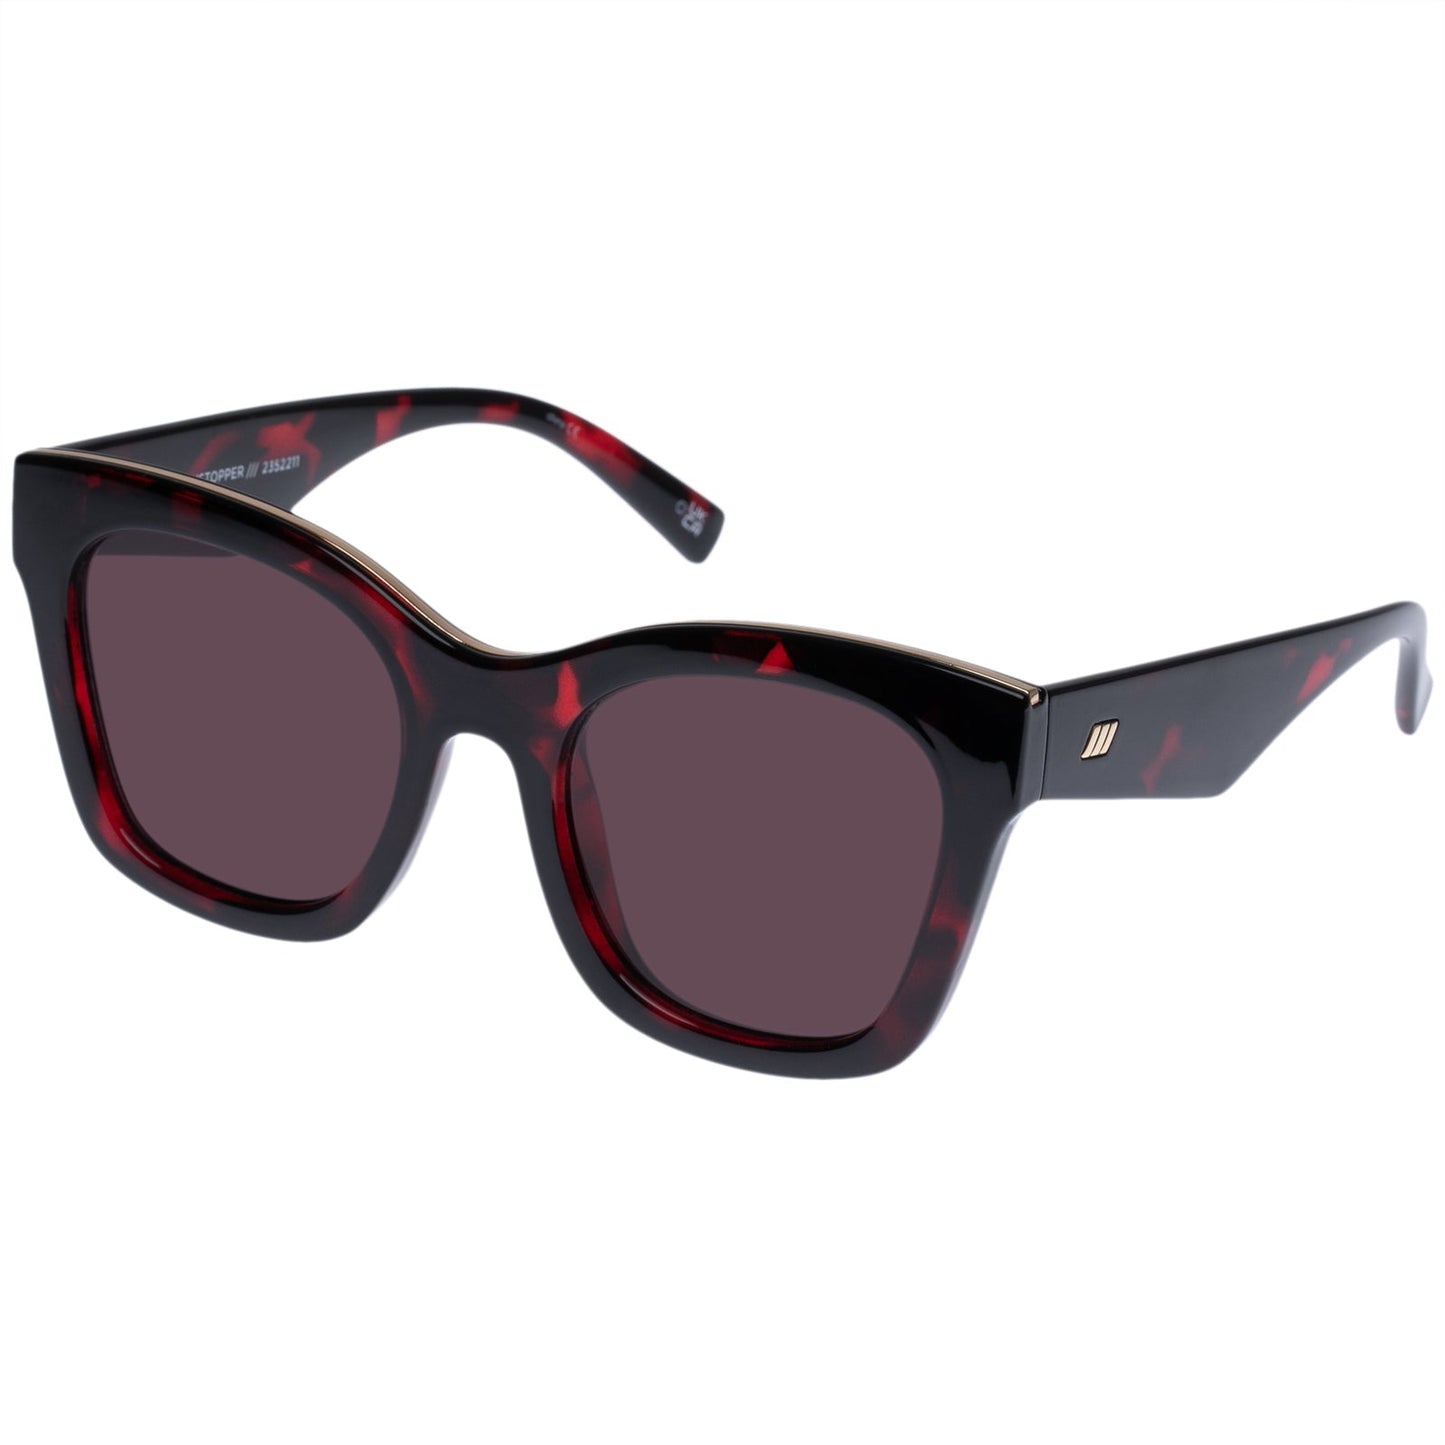 Le Specs - Showstopper - Cherry Tort